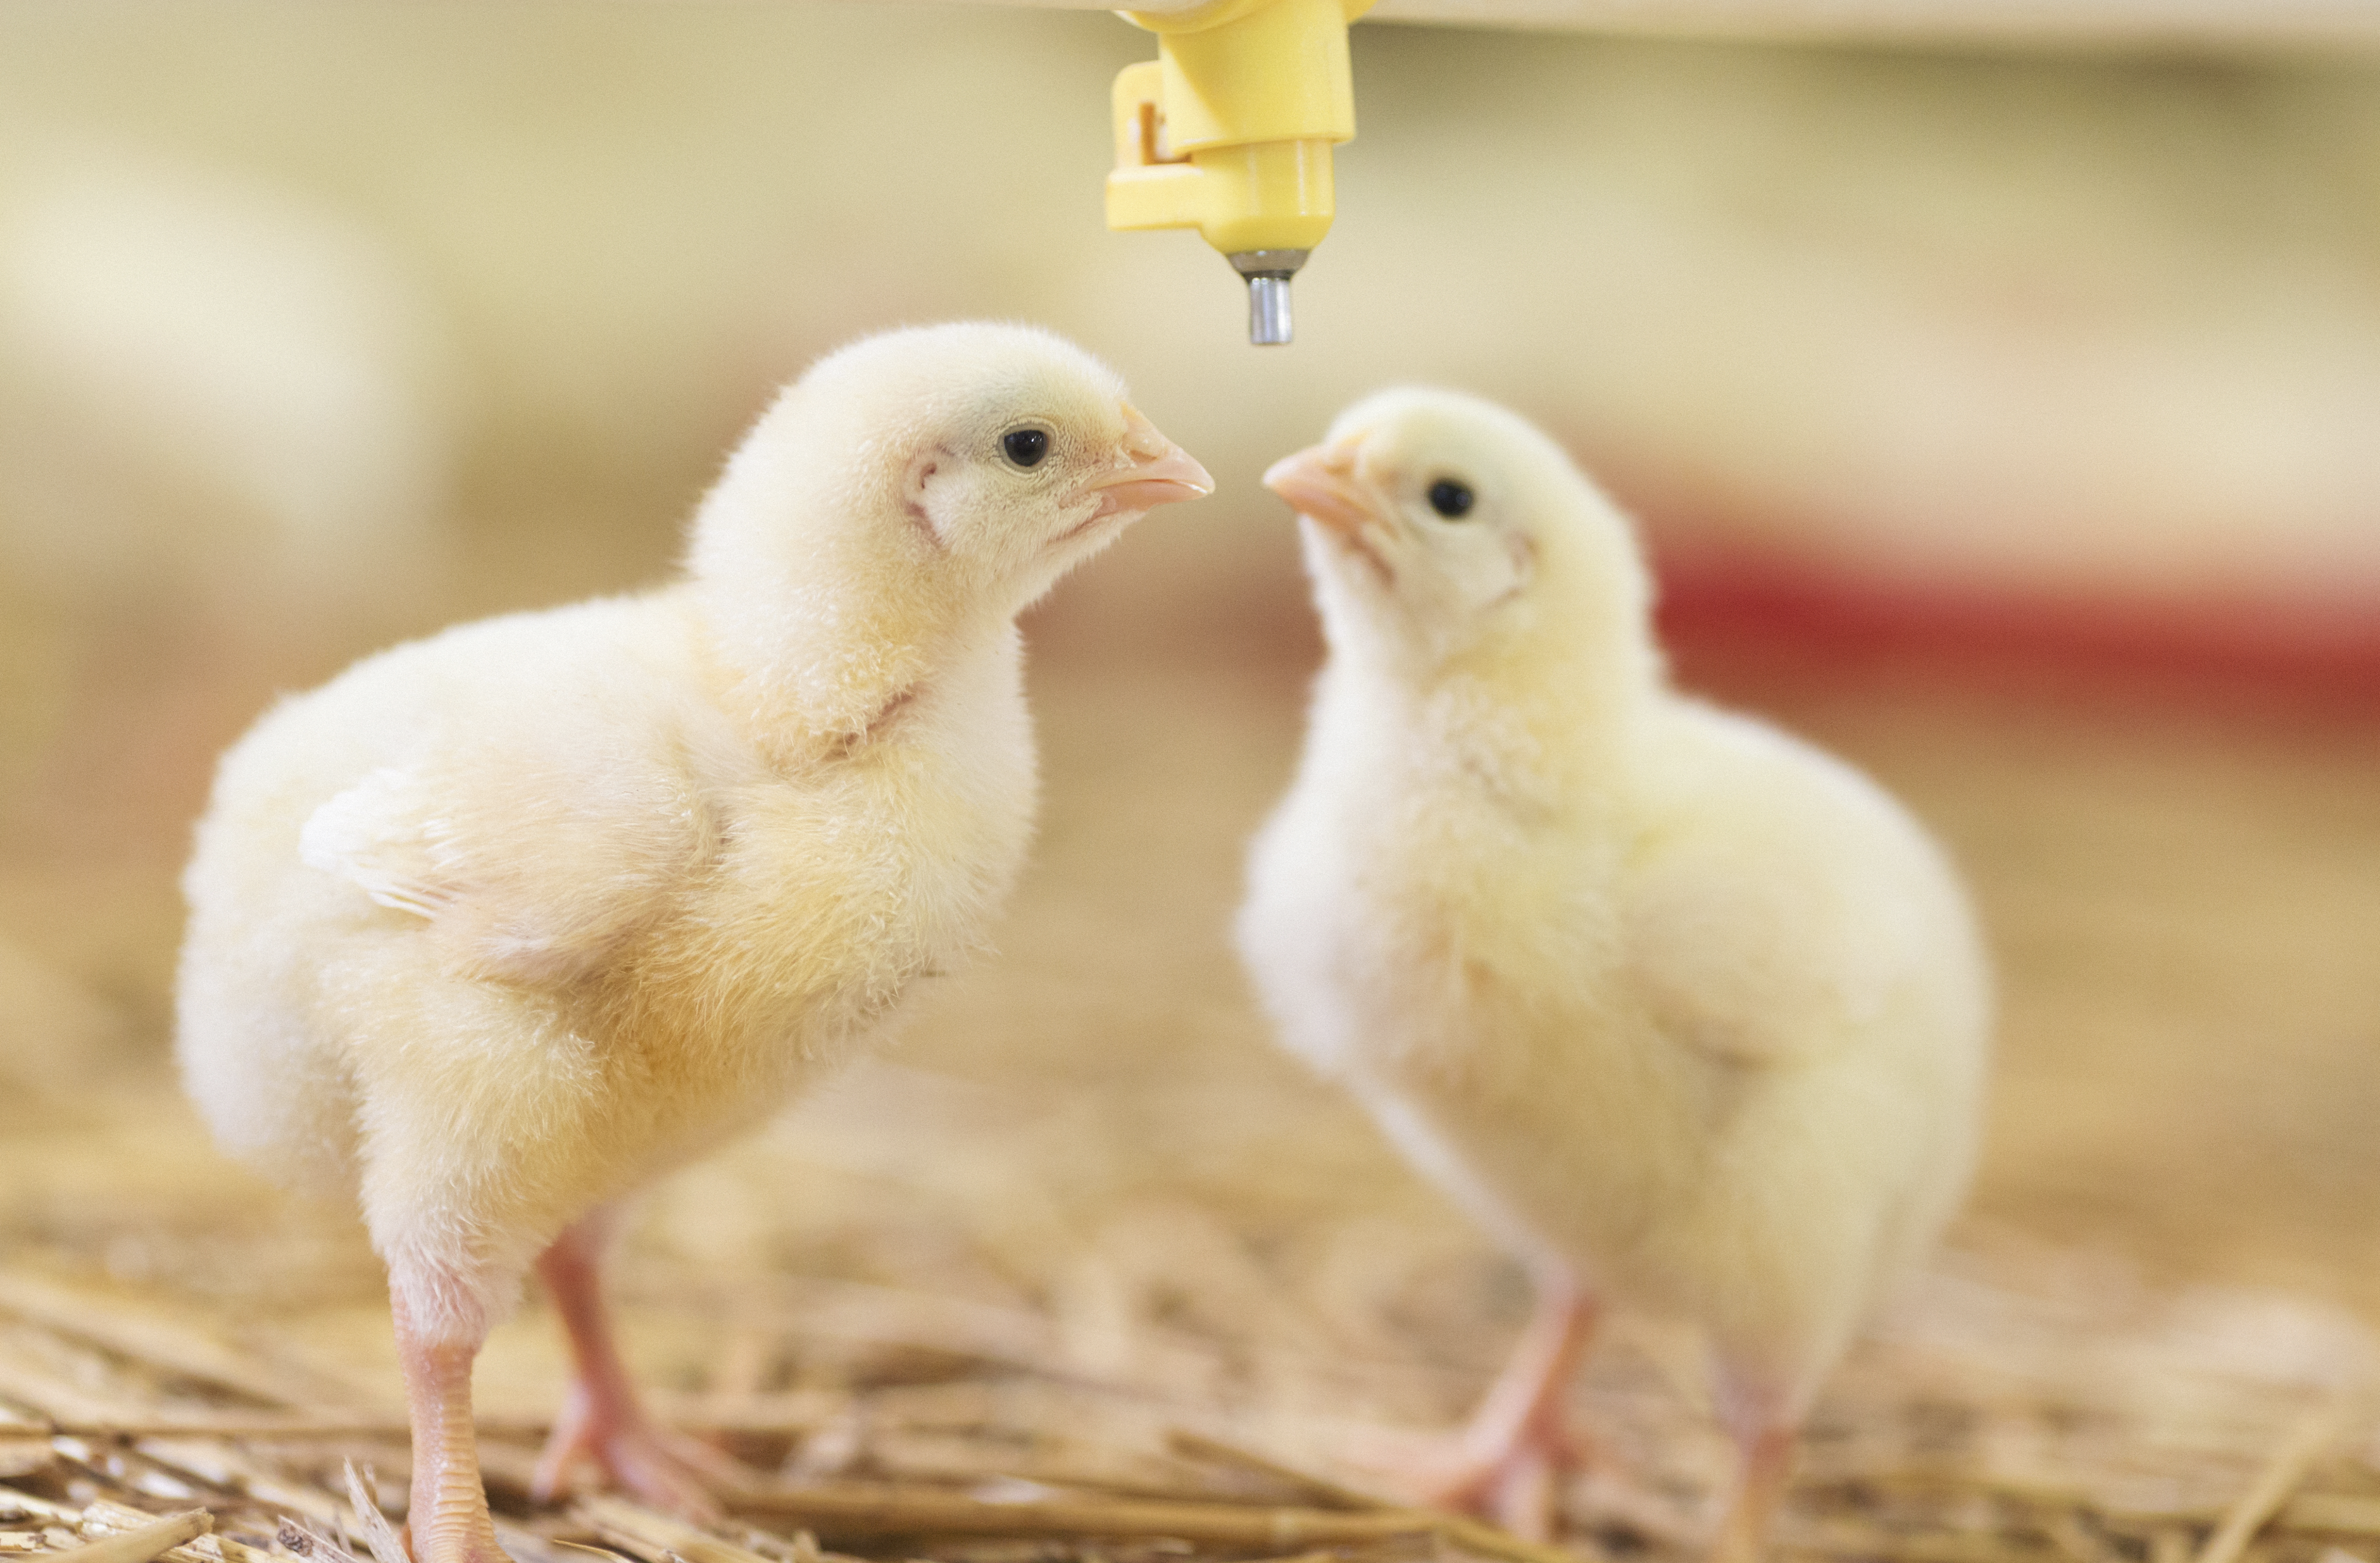 Two young chicks drinking water